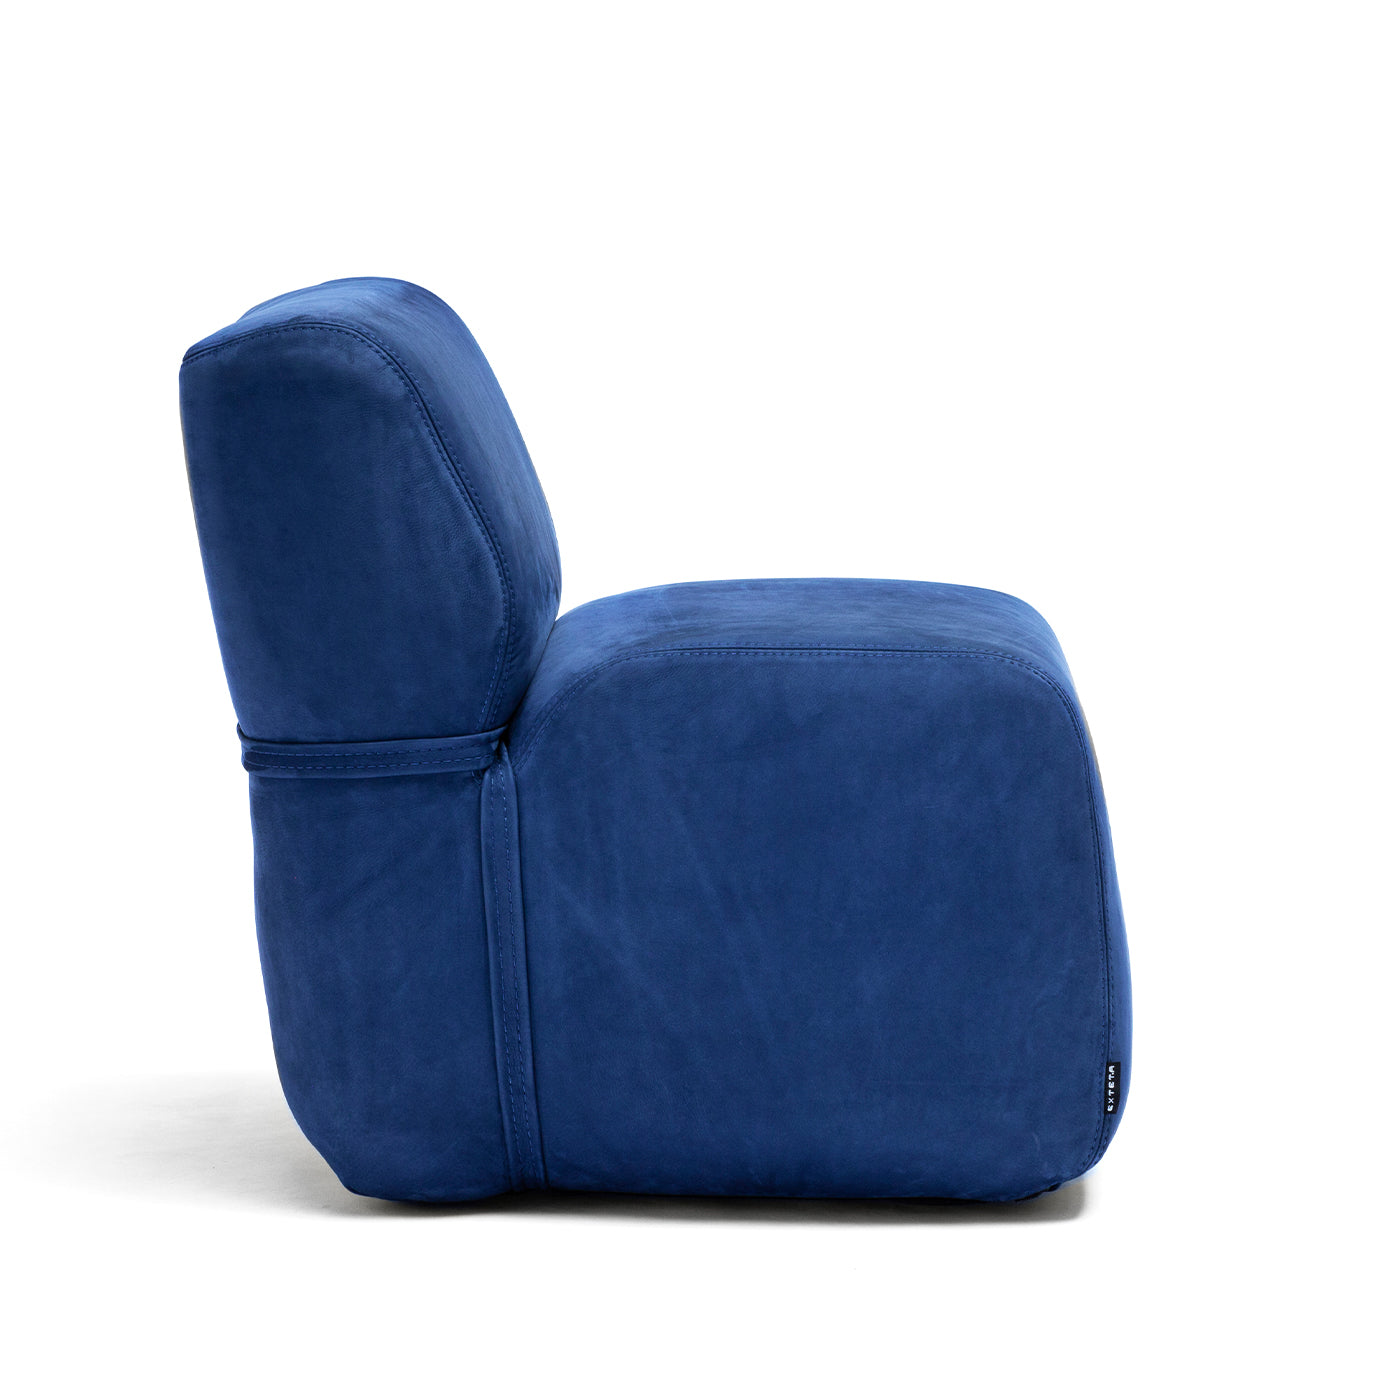 Soft Small Blue Lounge Chair - Alternative view 2